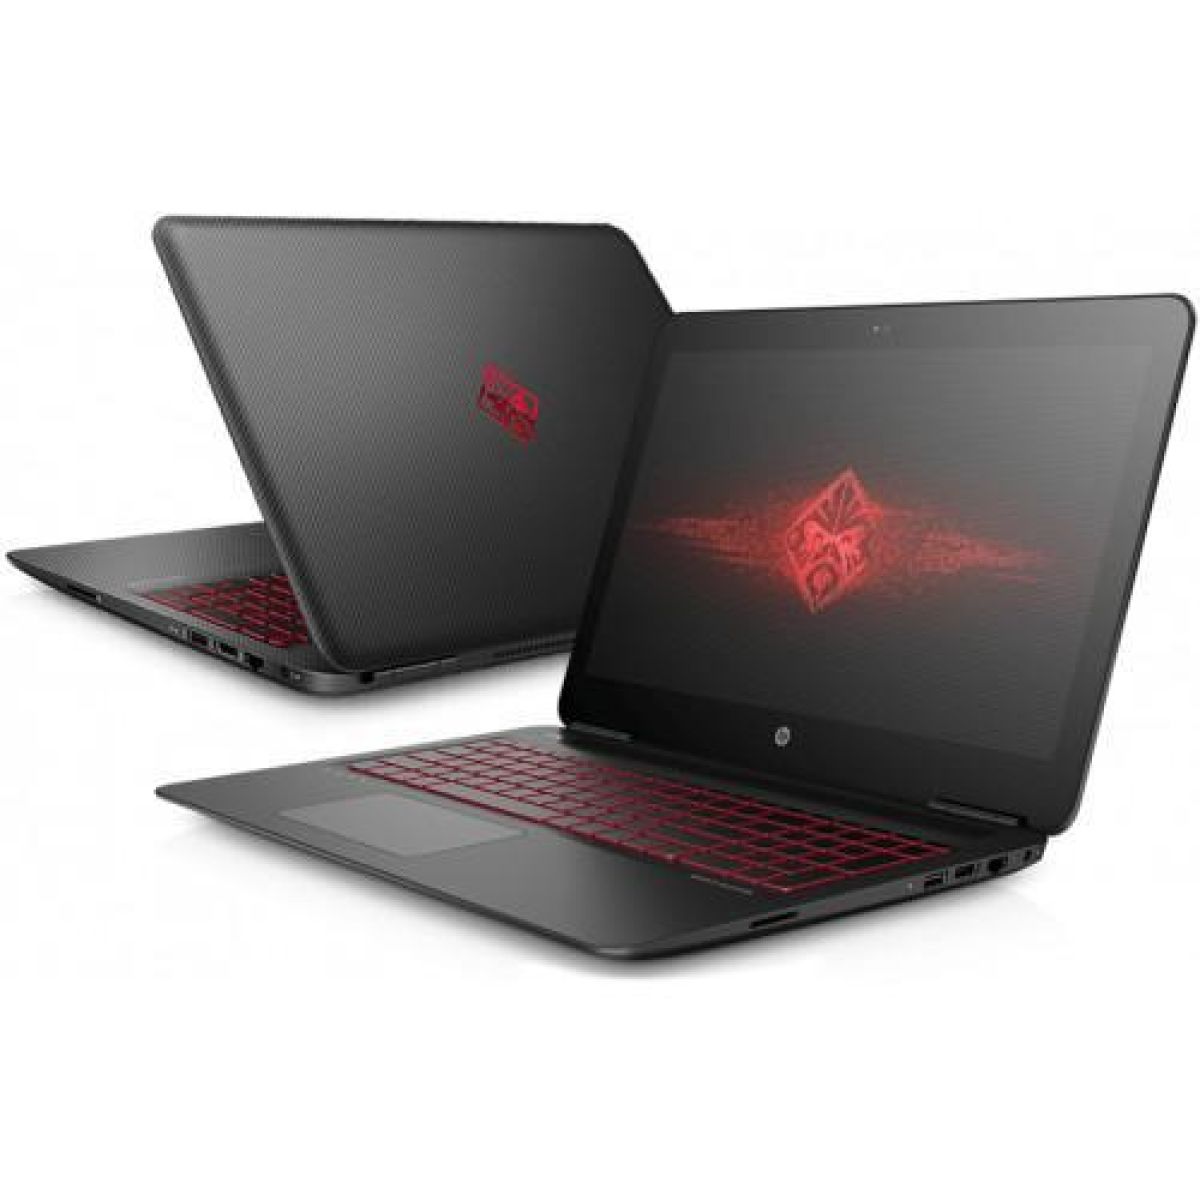 HP Omen 7265ngw Intel Core i5-7300HQ 2,5Ghz 16 Go HDD 1 To